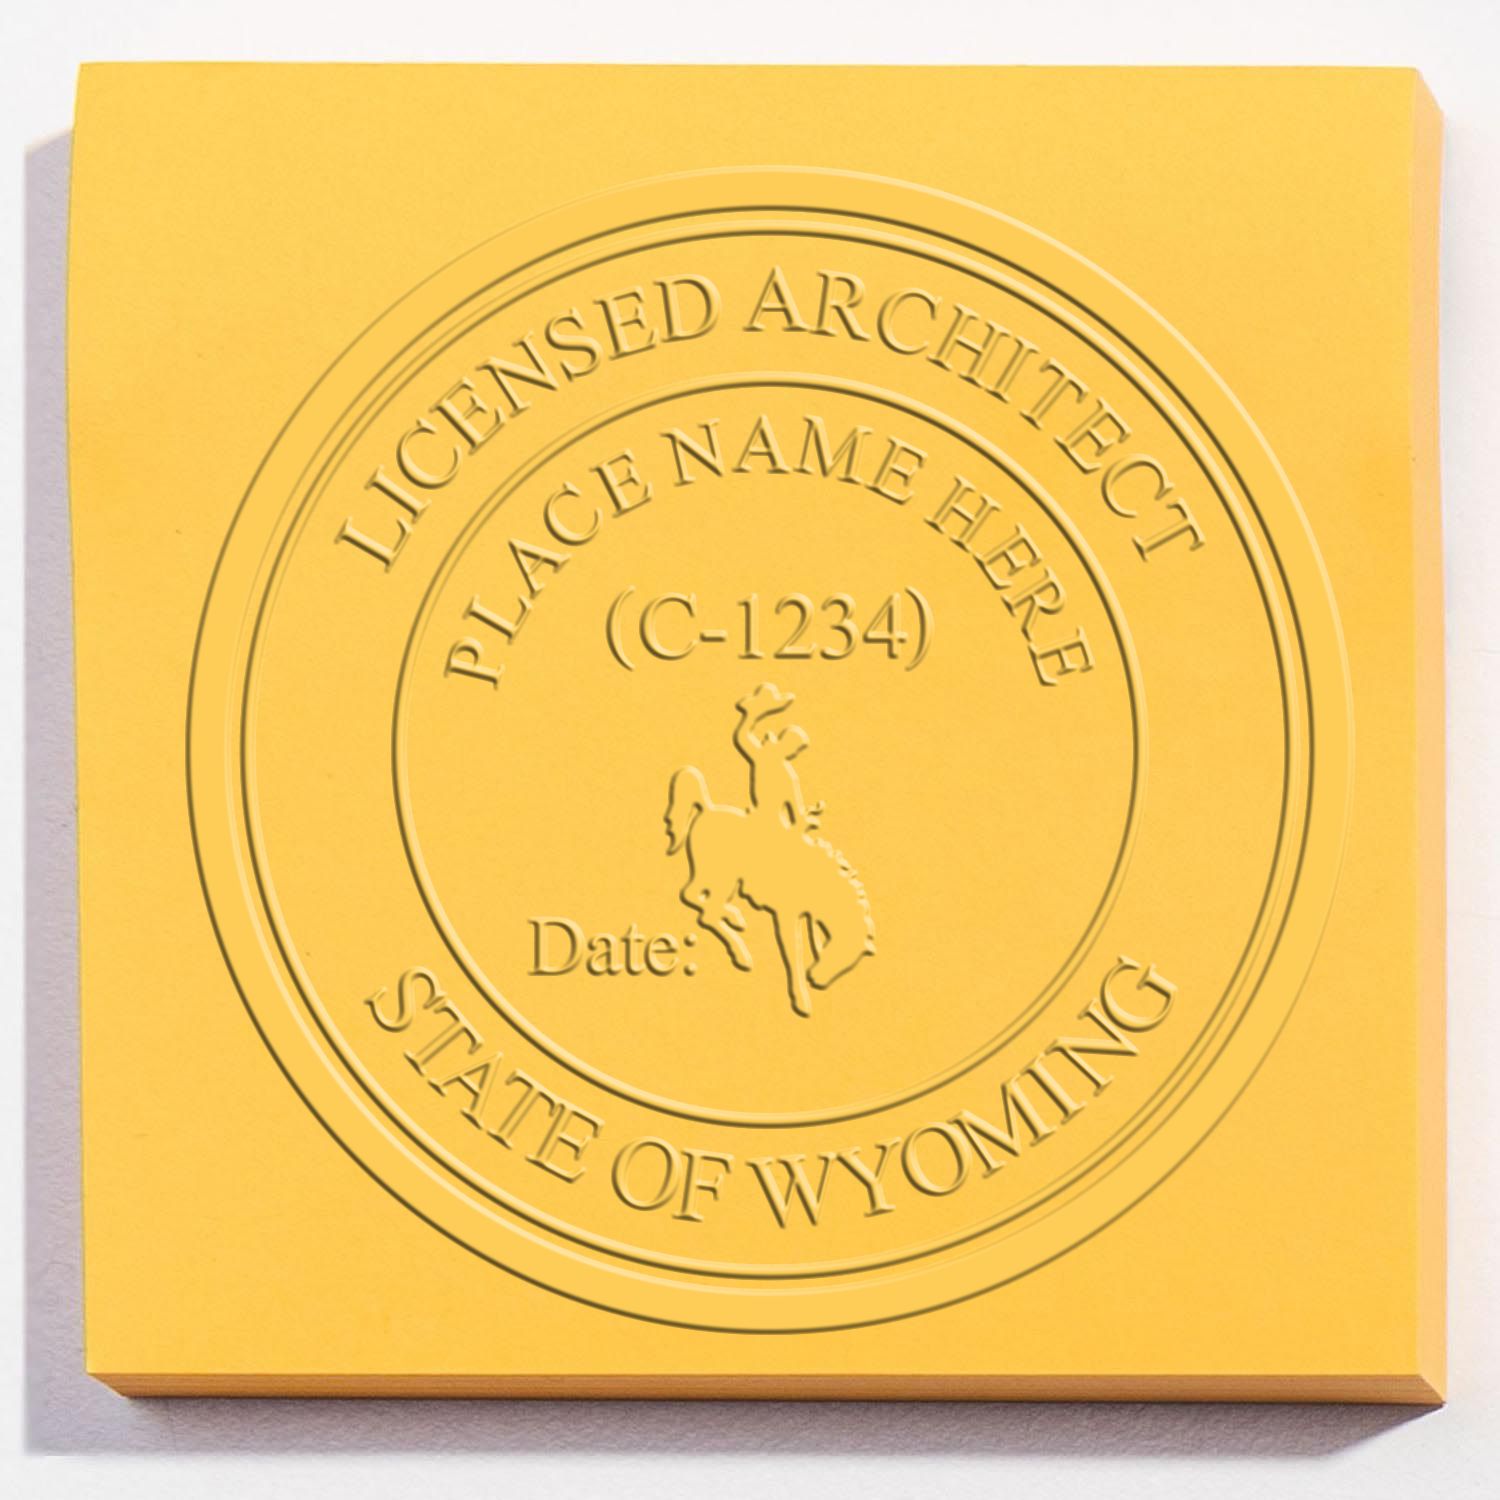 A lifestyle photo showing a stamped image of the Wyoming Desk Architect Embossing Seal on a piece of paper